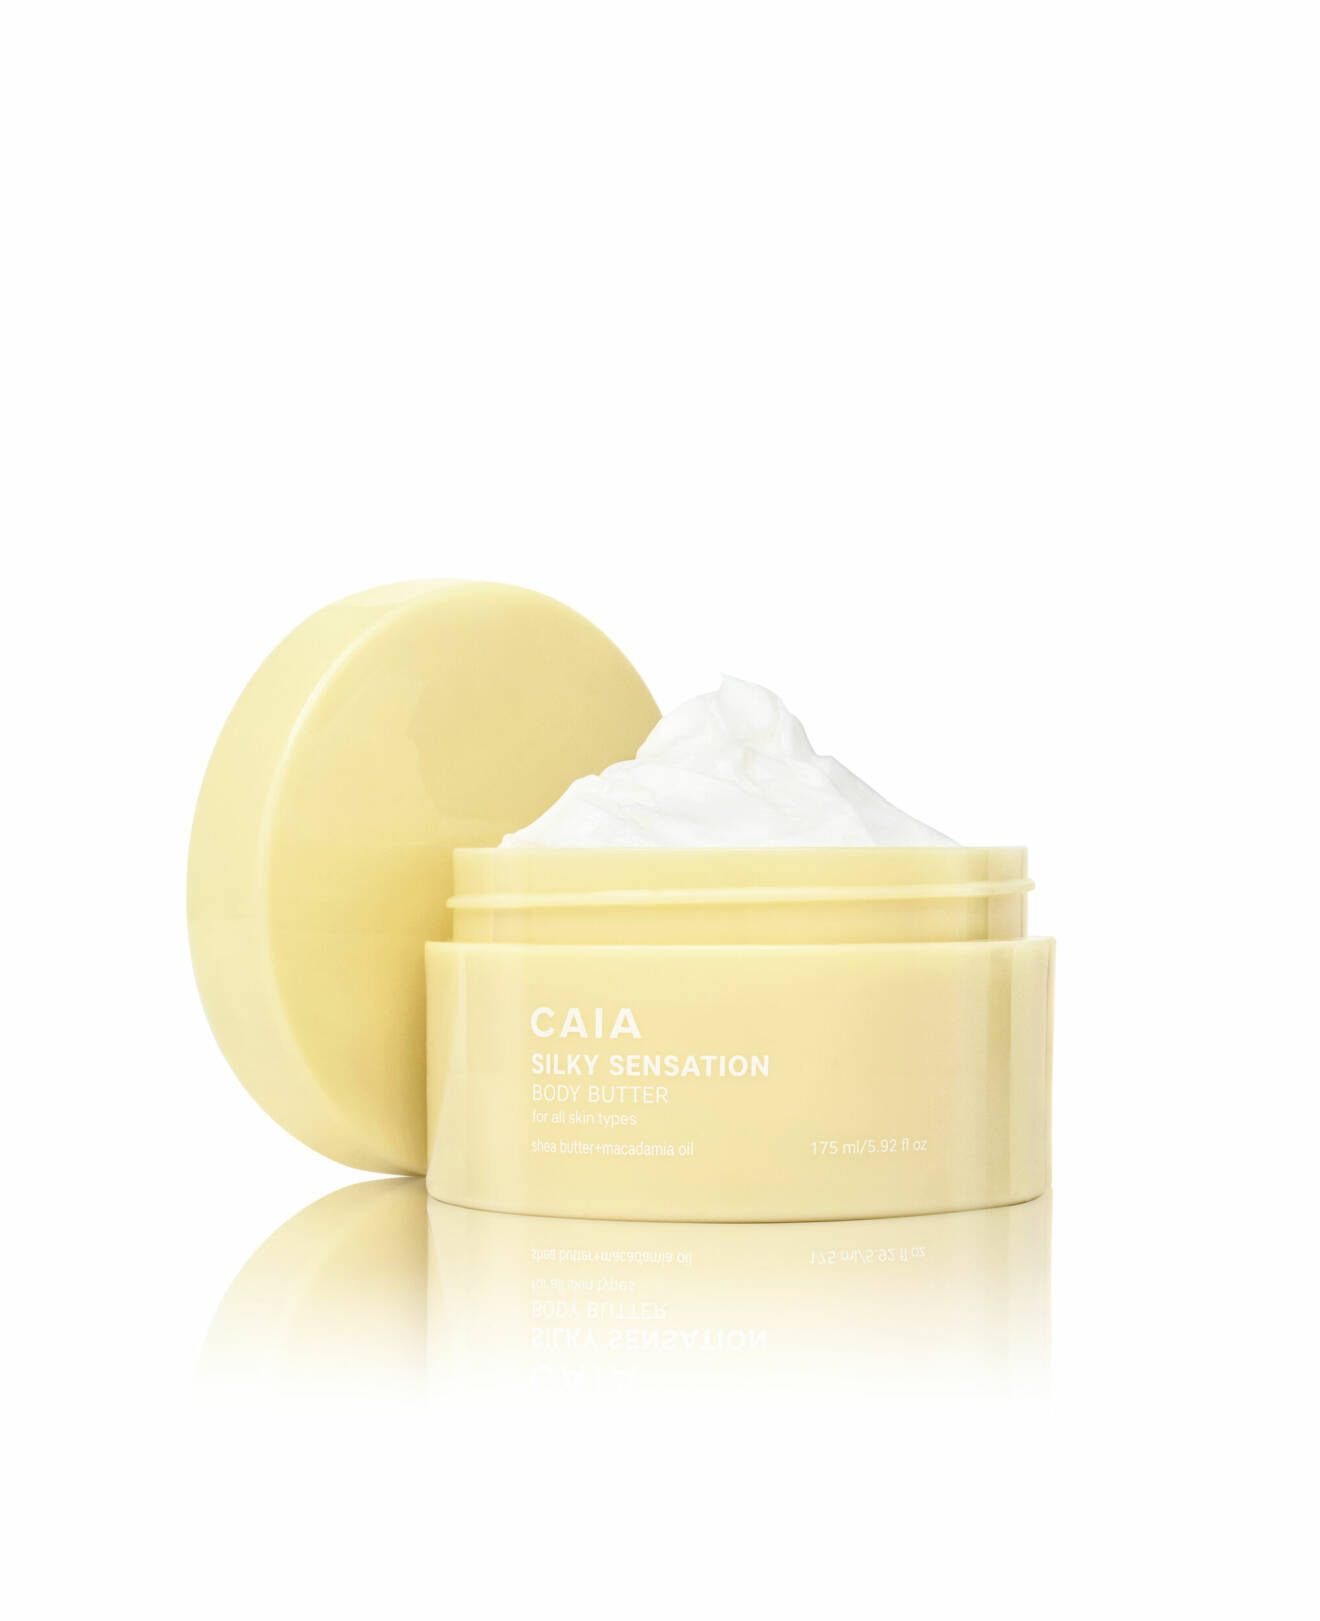 Caia body butter